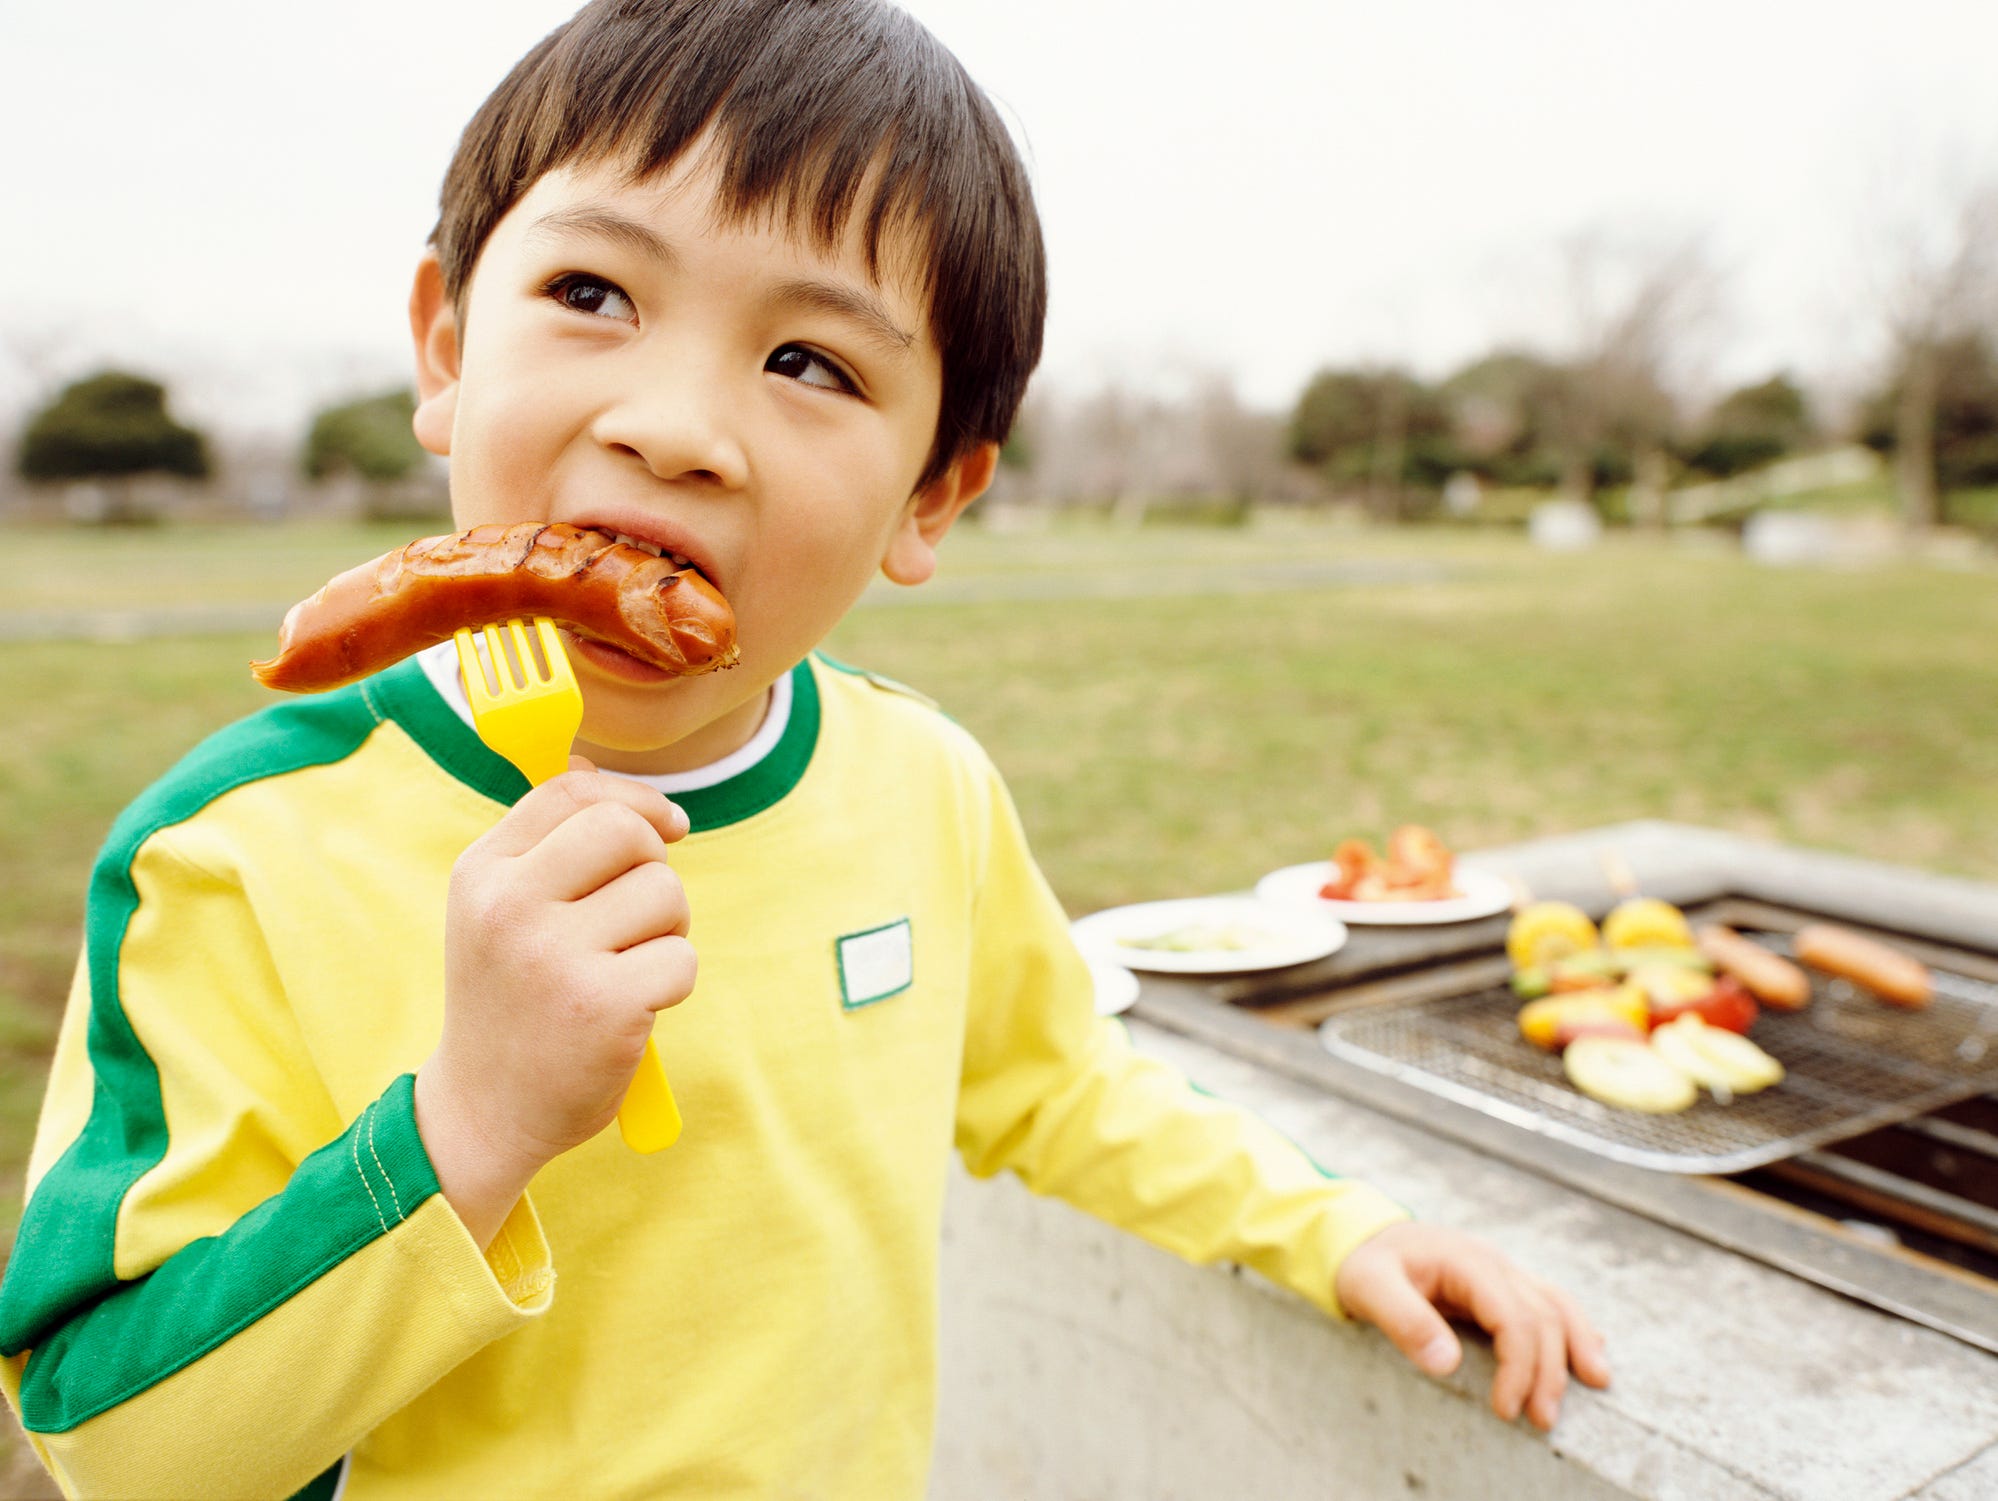 4th of July warning: Hot dogs are 'serious choking hazards' for kids